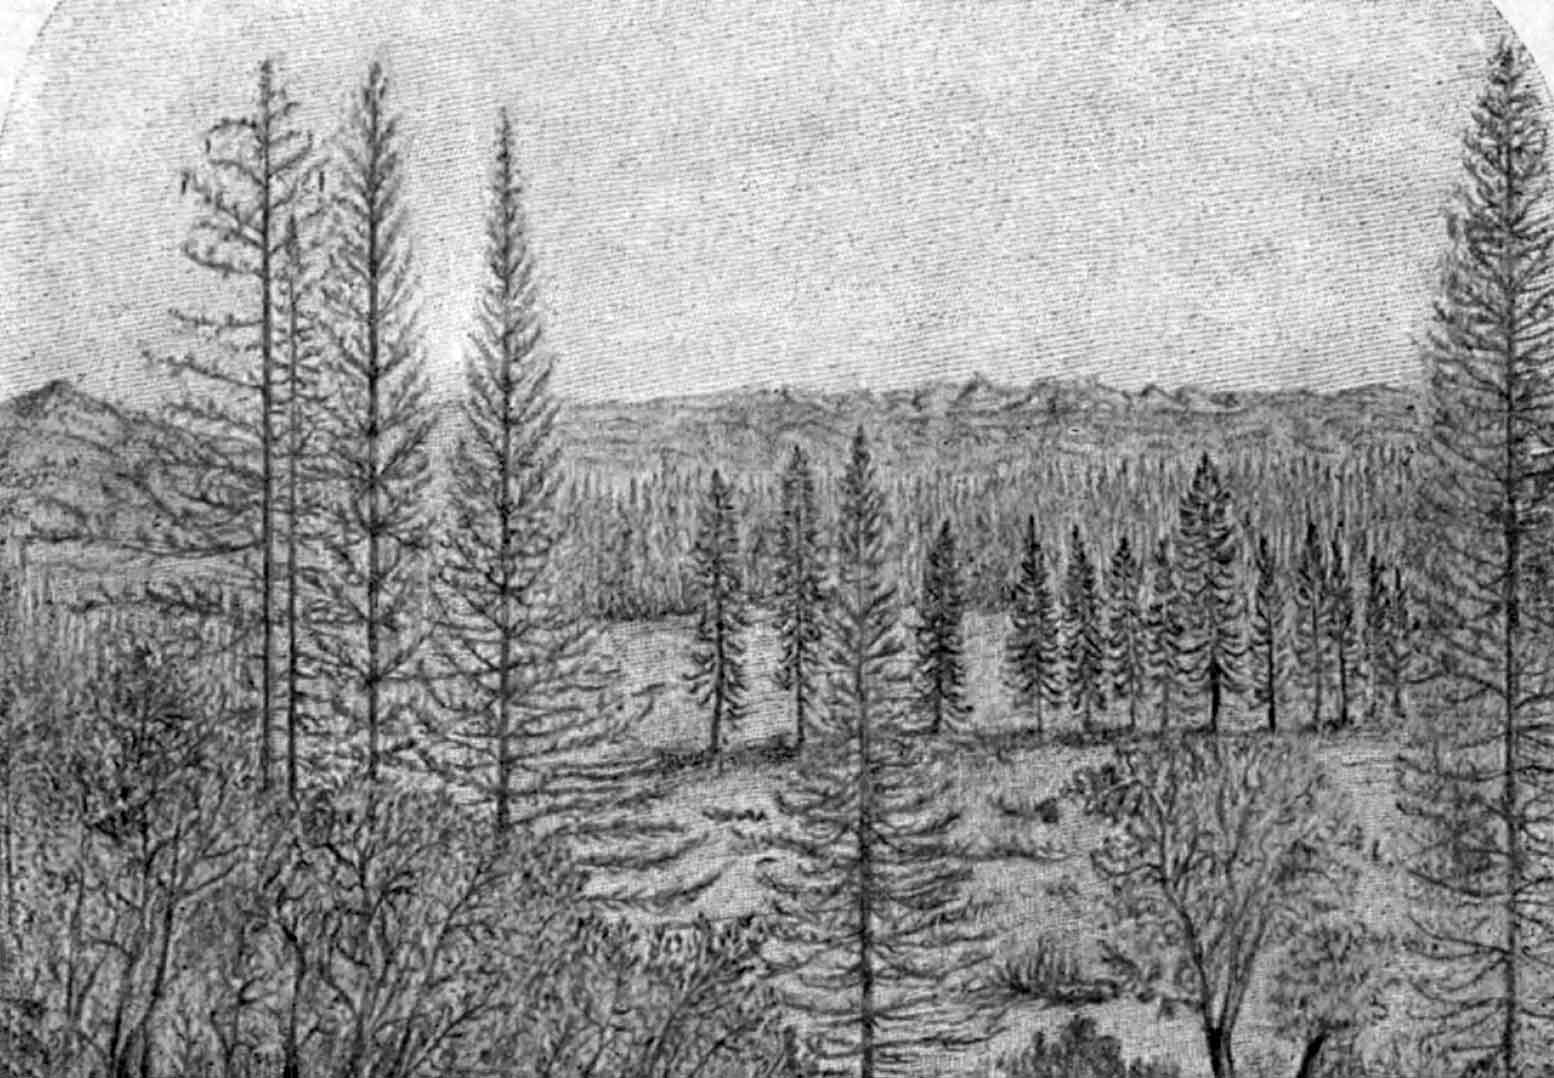 A sketch of a high-country forests and meadows with shrubs and trees in the foreground, dense forest in the distance and rolling mountaintops lining the horizon.